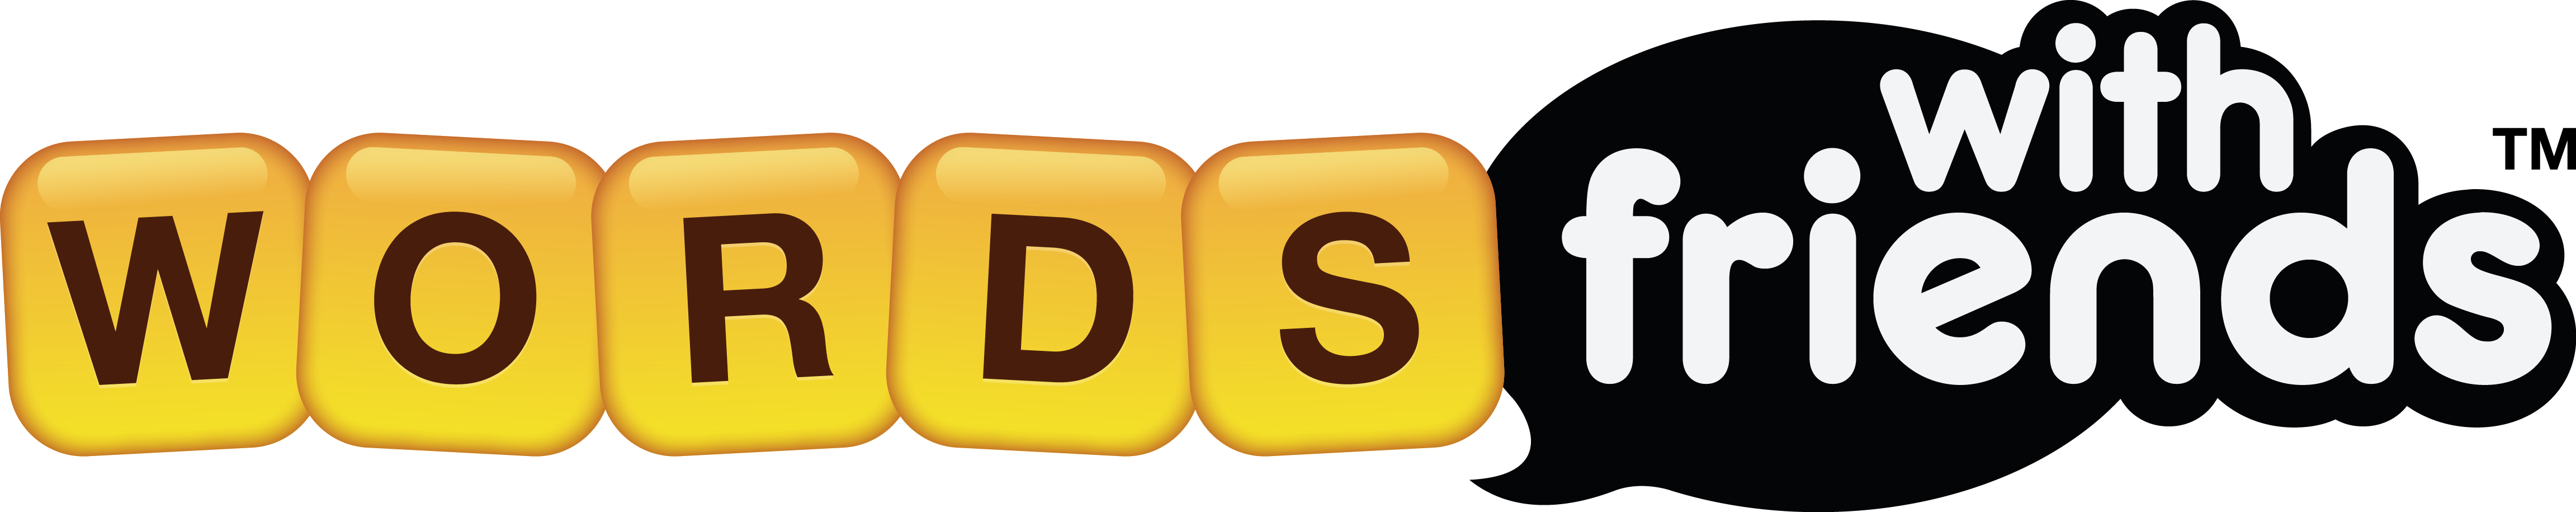 Words With Friends logo